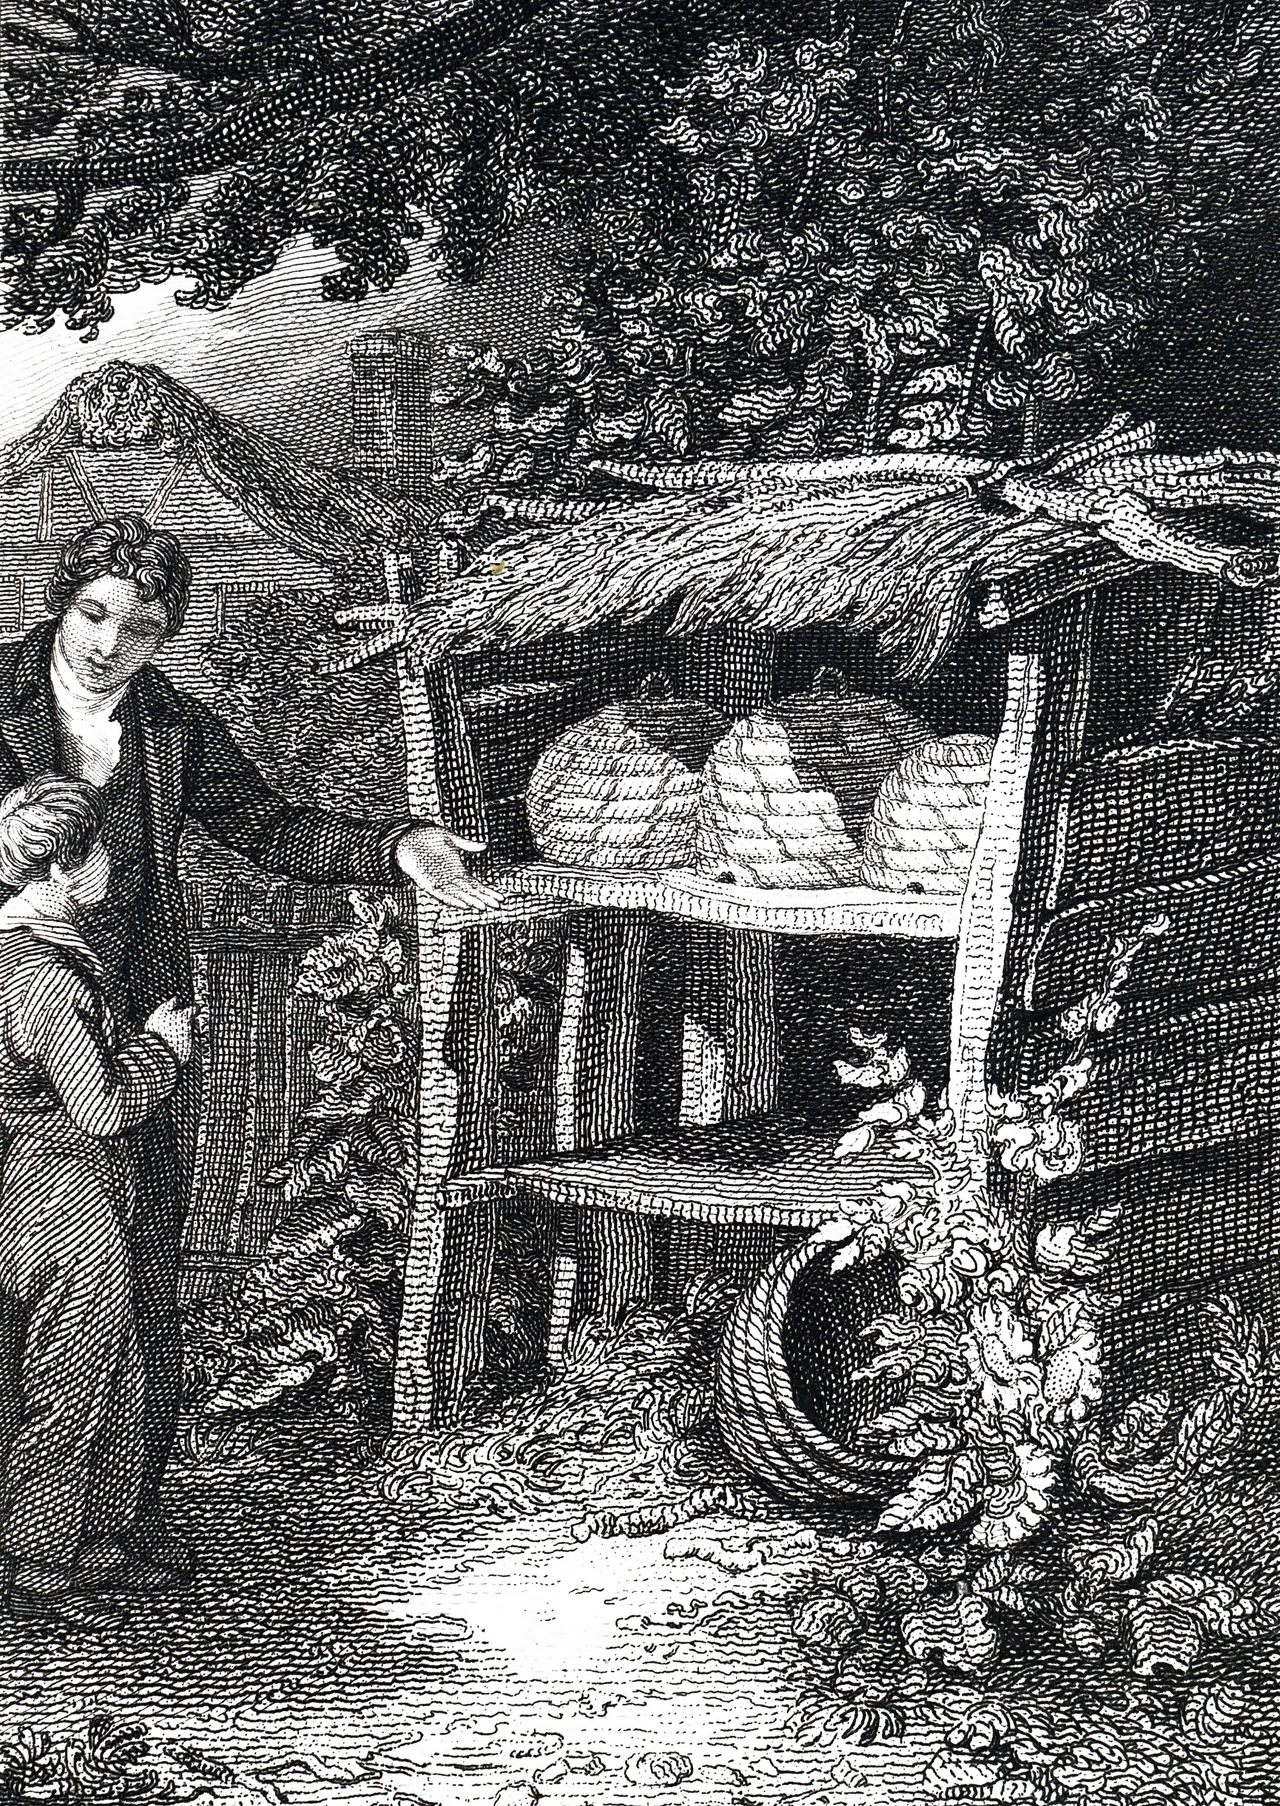 The 19th-century English artist John Romney depicted the all-important art of beekeeping.